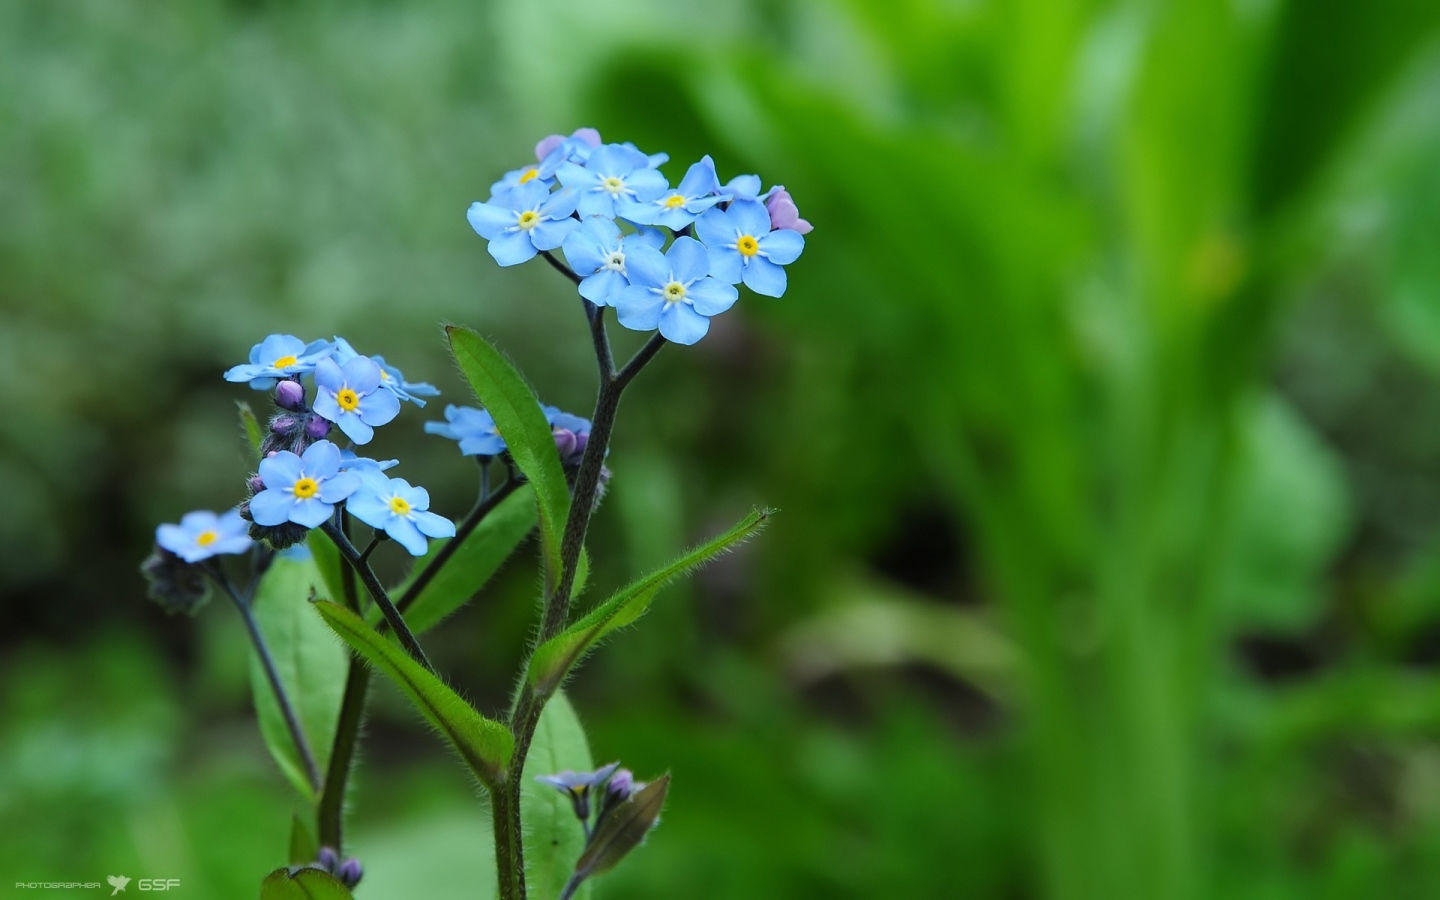 Beautiful flowers of forget-me